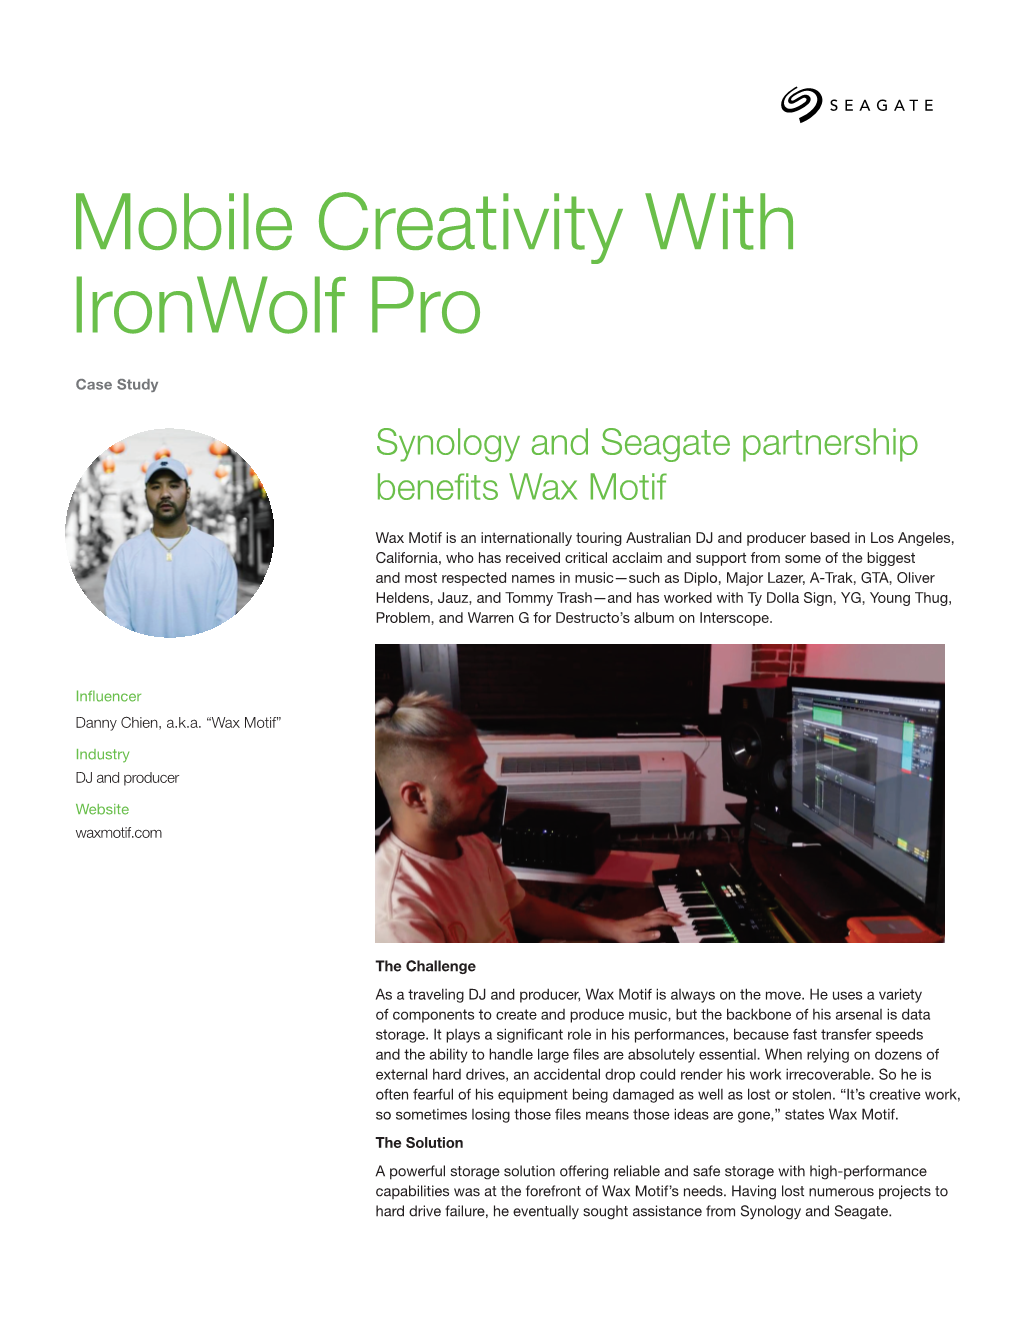 Mobile Creativity with Ironwolf Pro